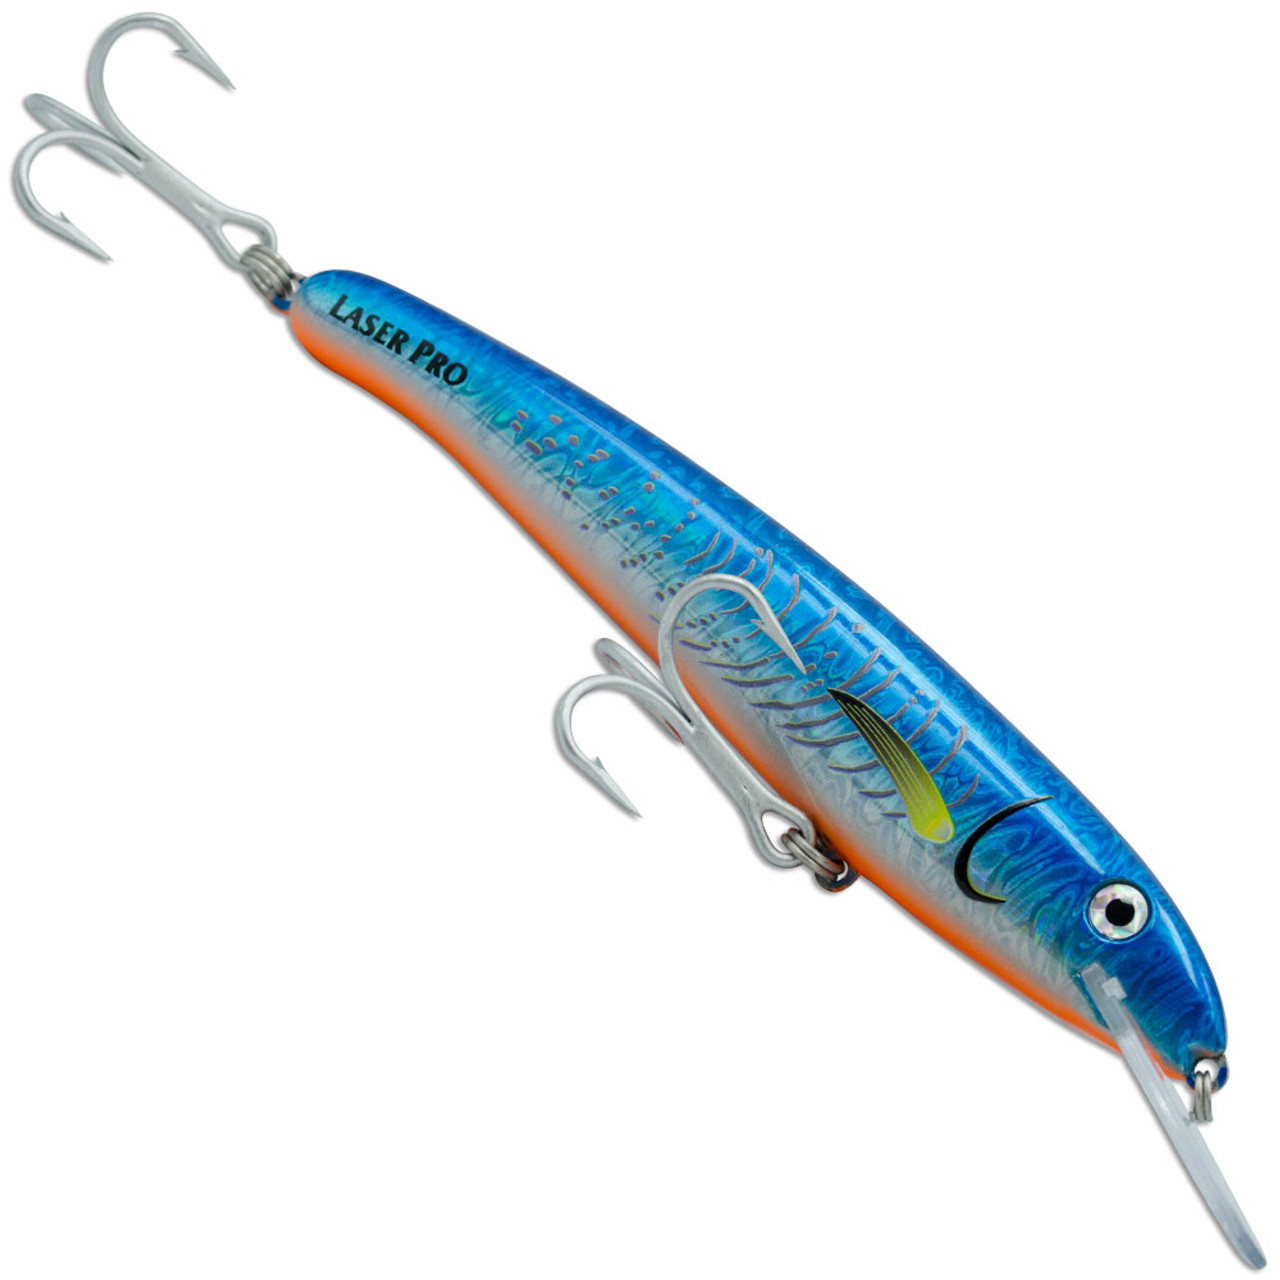 Exactly Discount Halco Laser Pro Lures authentic 100% - Summer Sale